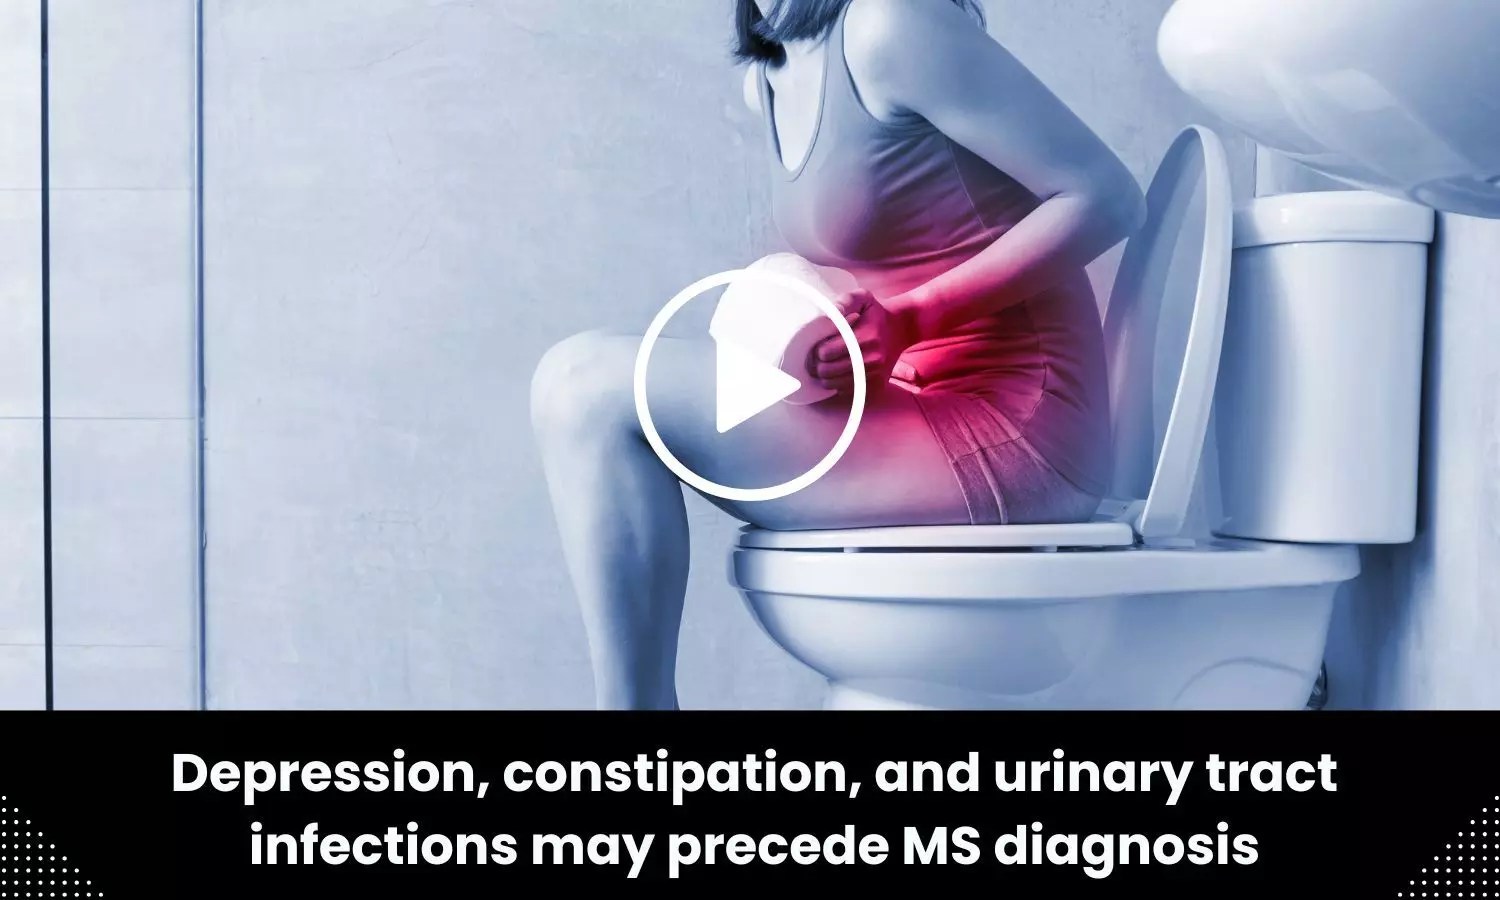 Depression, constipation, and urinary tract infections may precede MS diagnosis